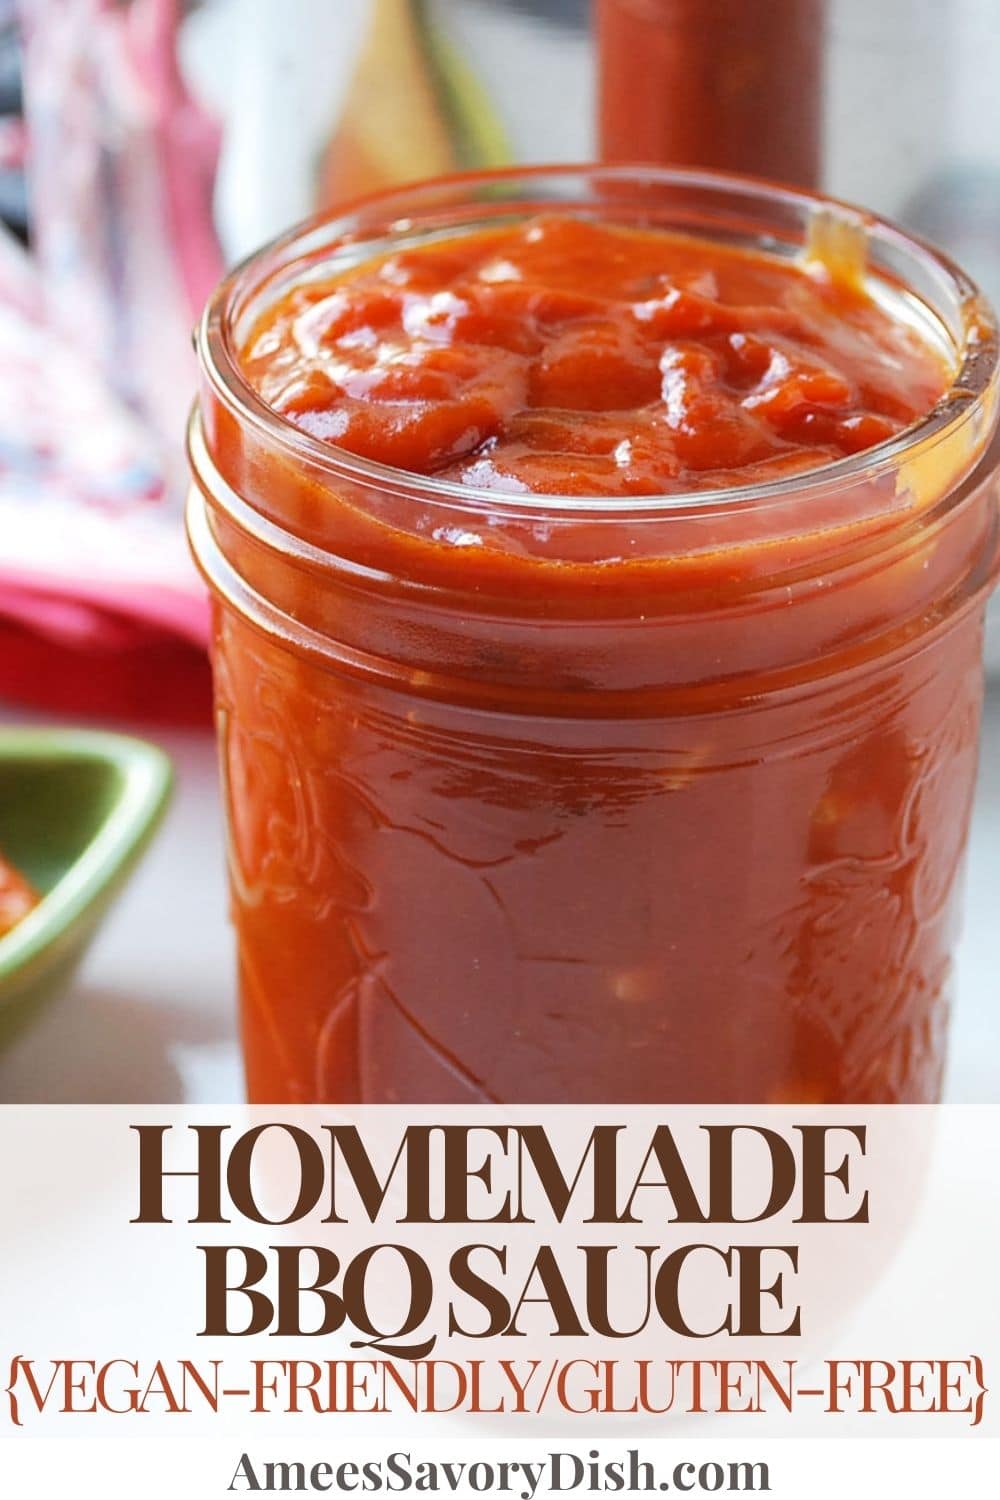 This Homemade BBQ Sauce blows away anything from the store and is made with easy-to-find vegan-friendly ingredients. via @Ameessavorydish